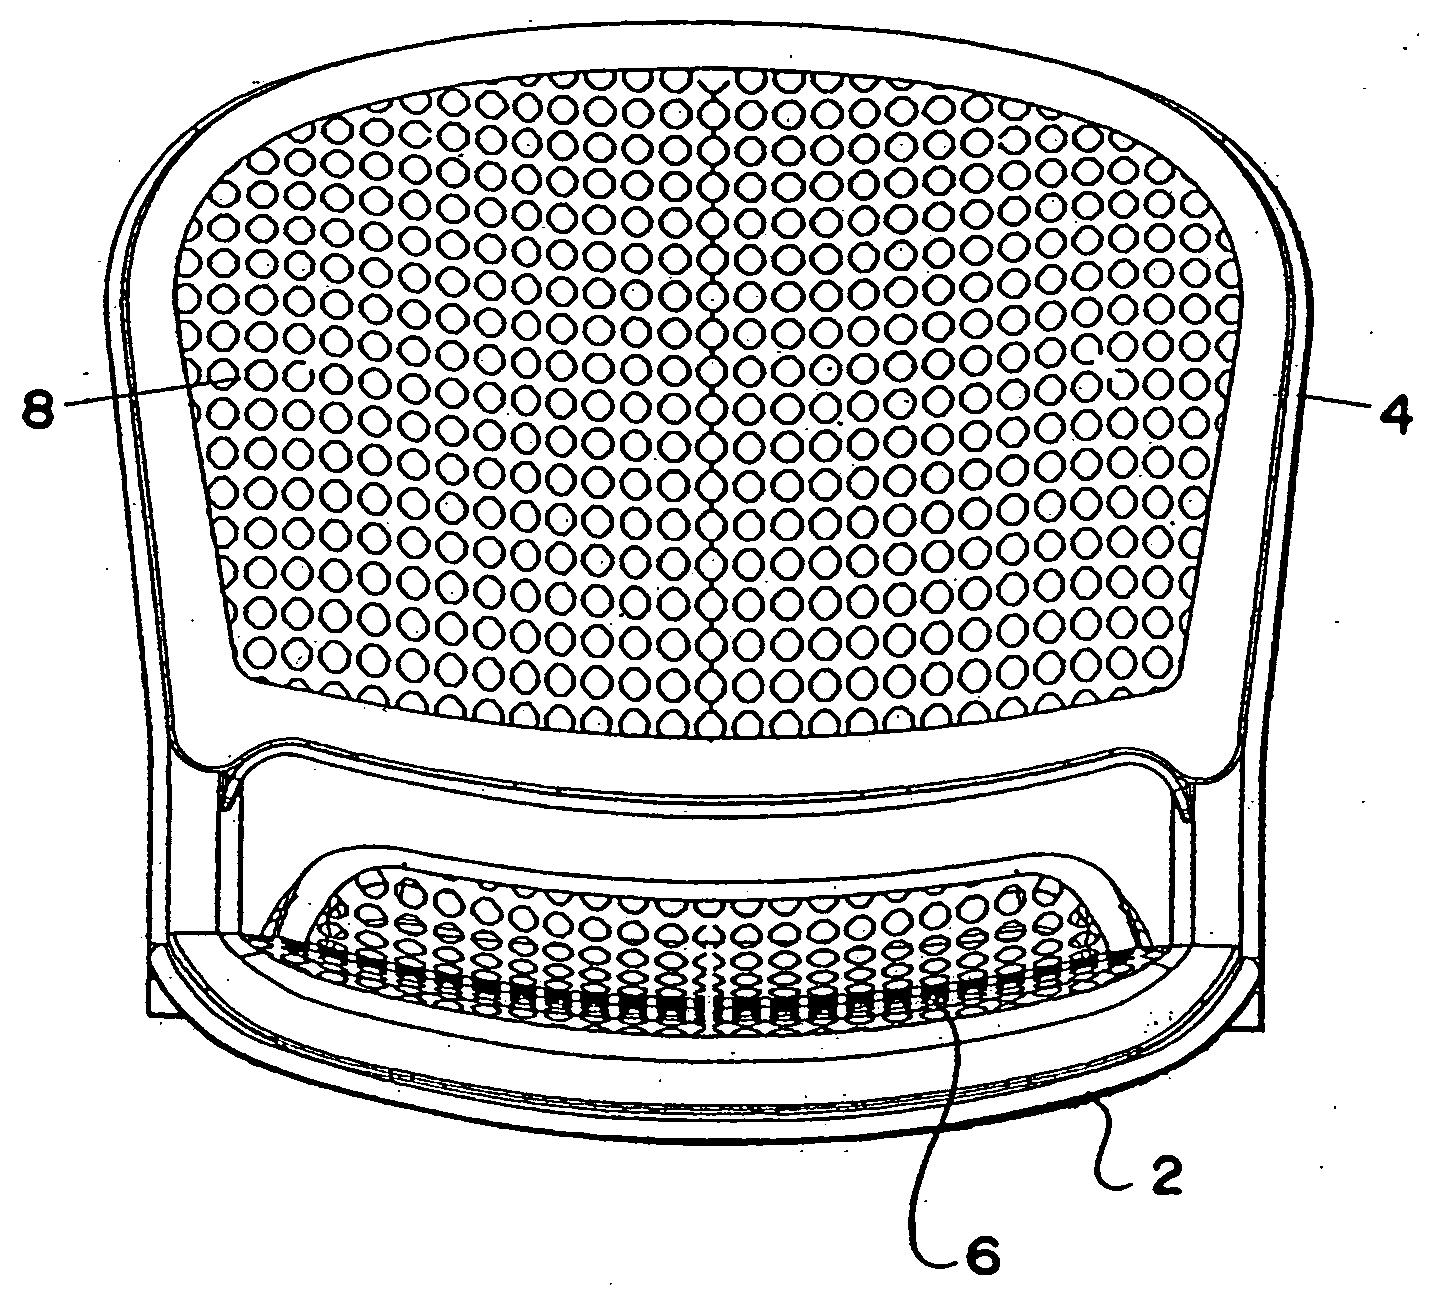 Seating structure having flexible support surface